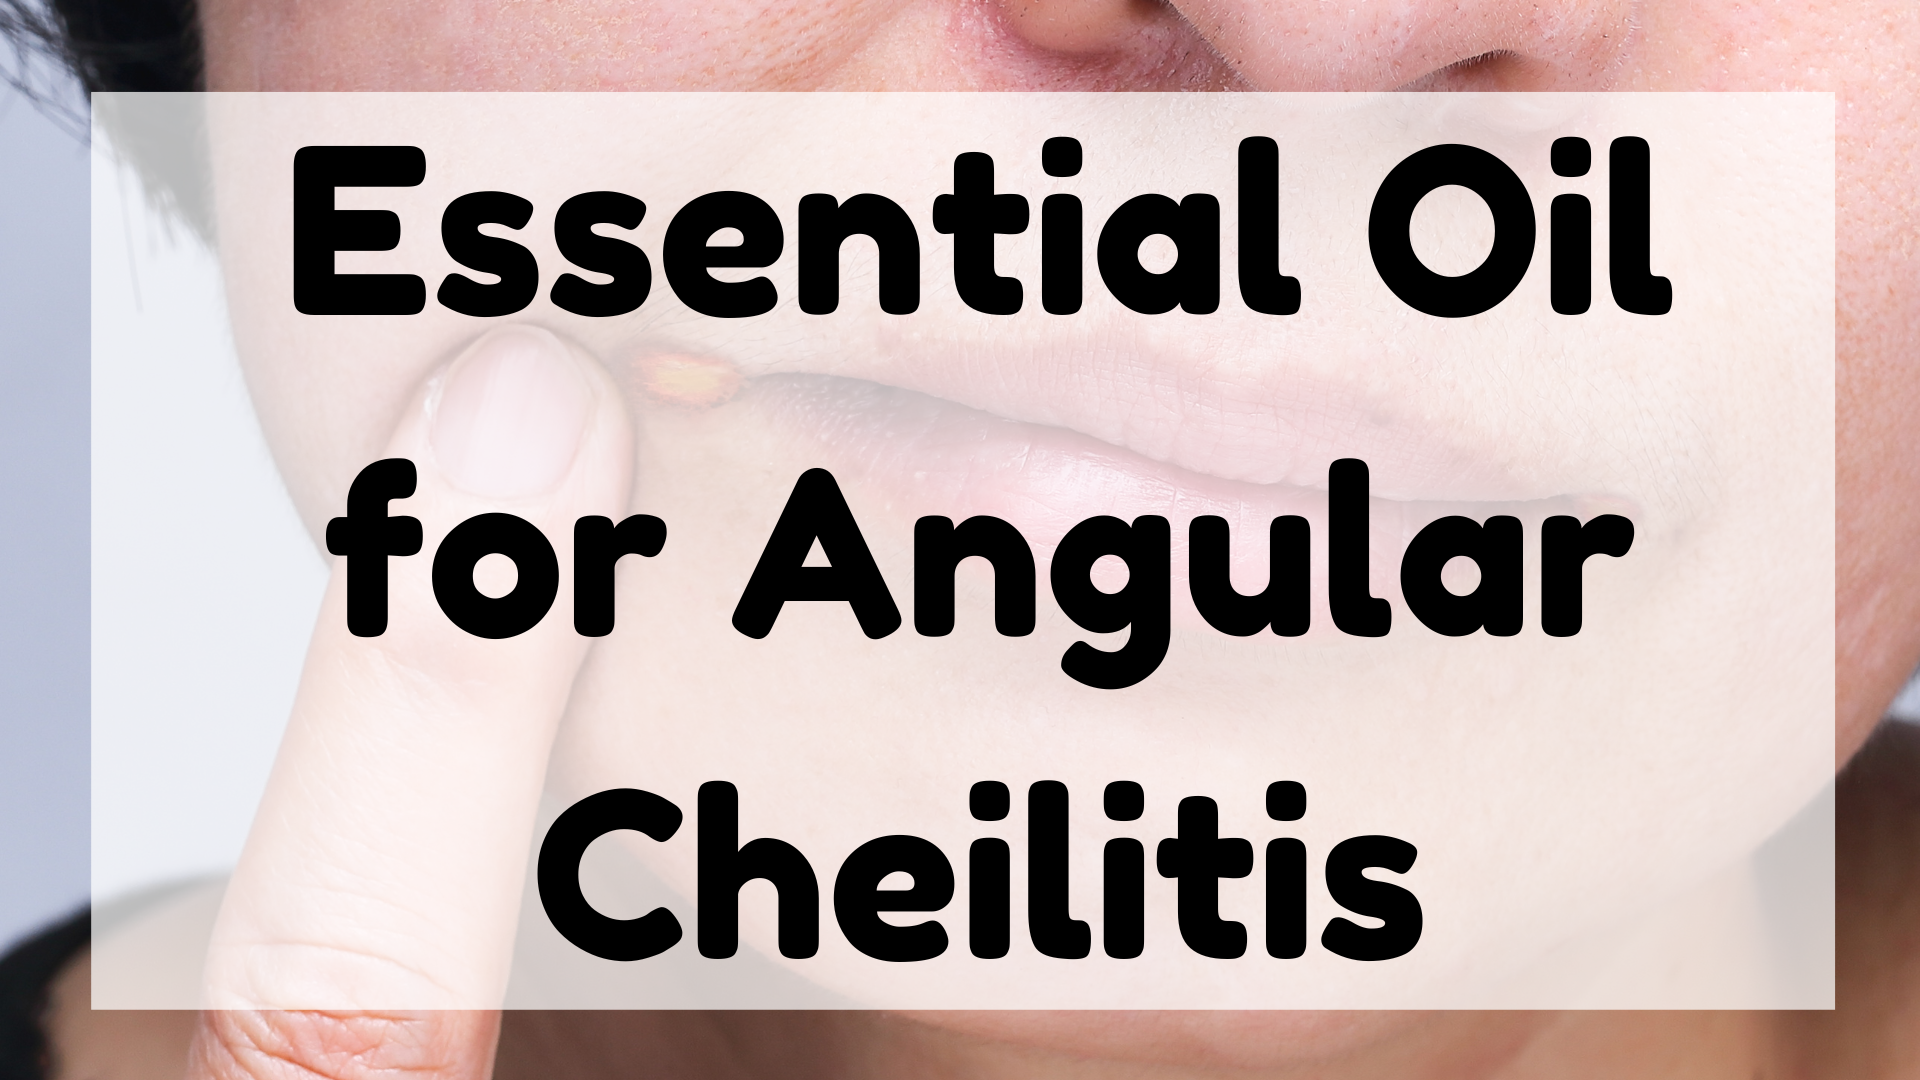 Essential Oil for Angular Cheilitis featured image